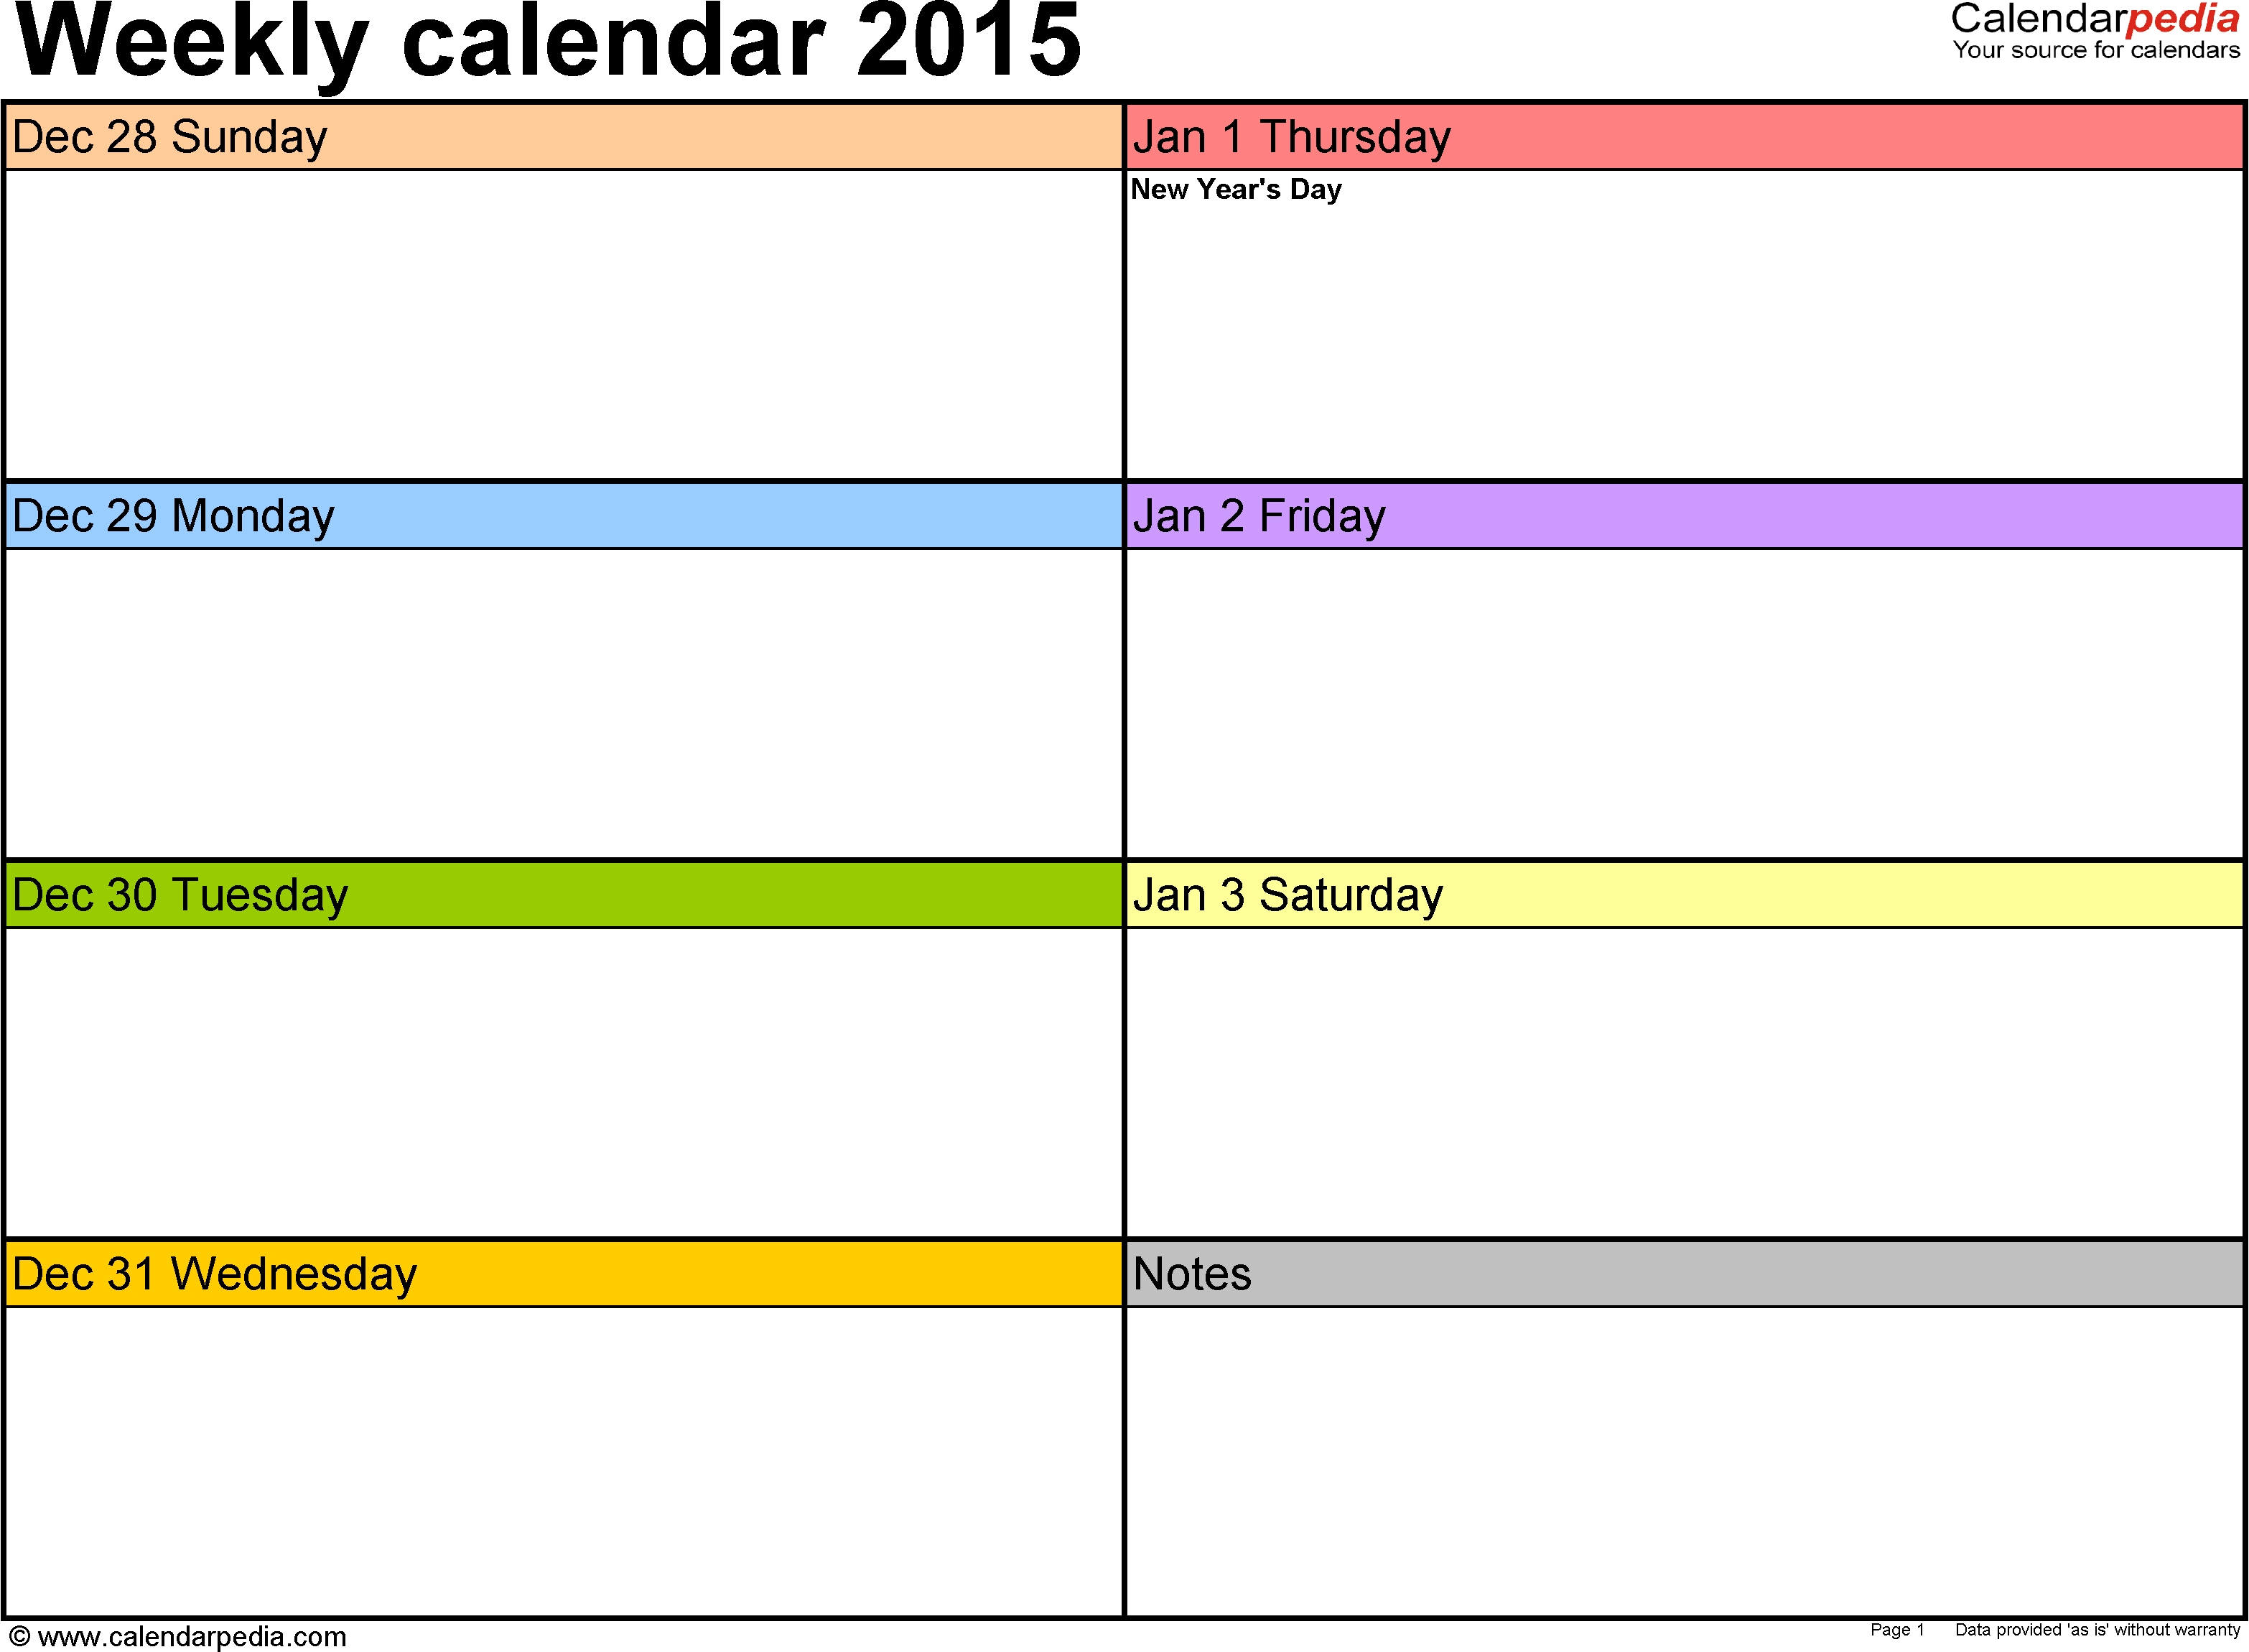 Weekly Calendars 2015 For Pdf - 12 Free Printable Templates